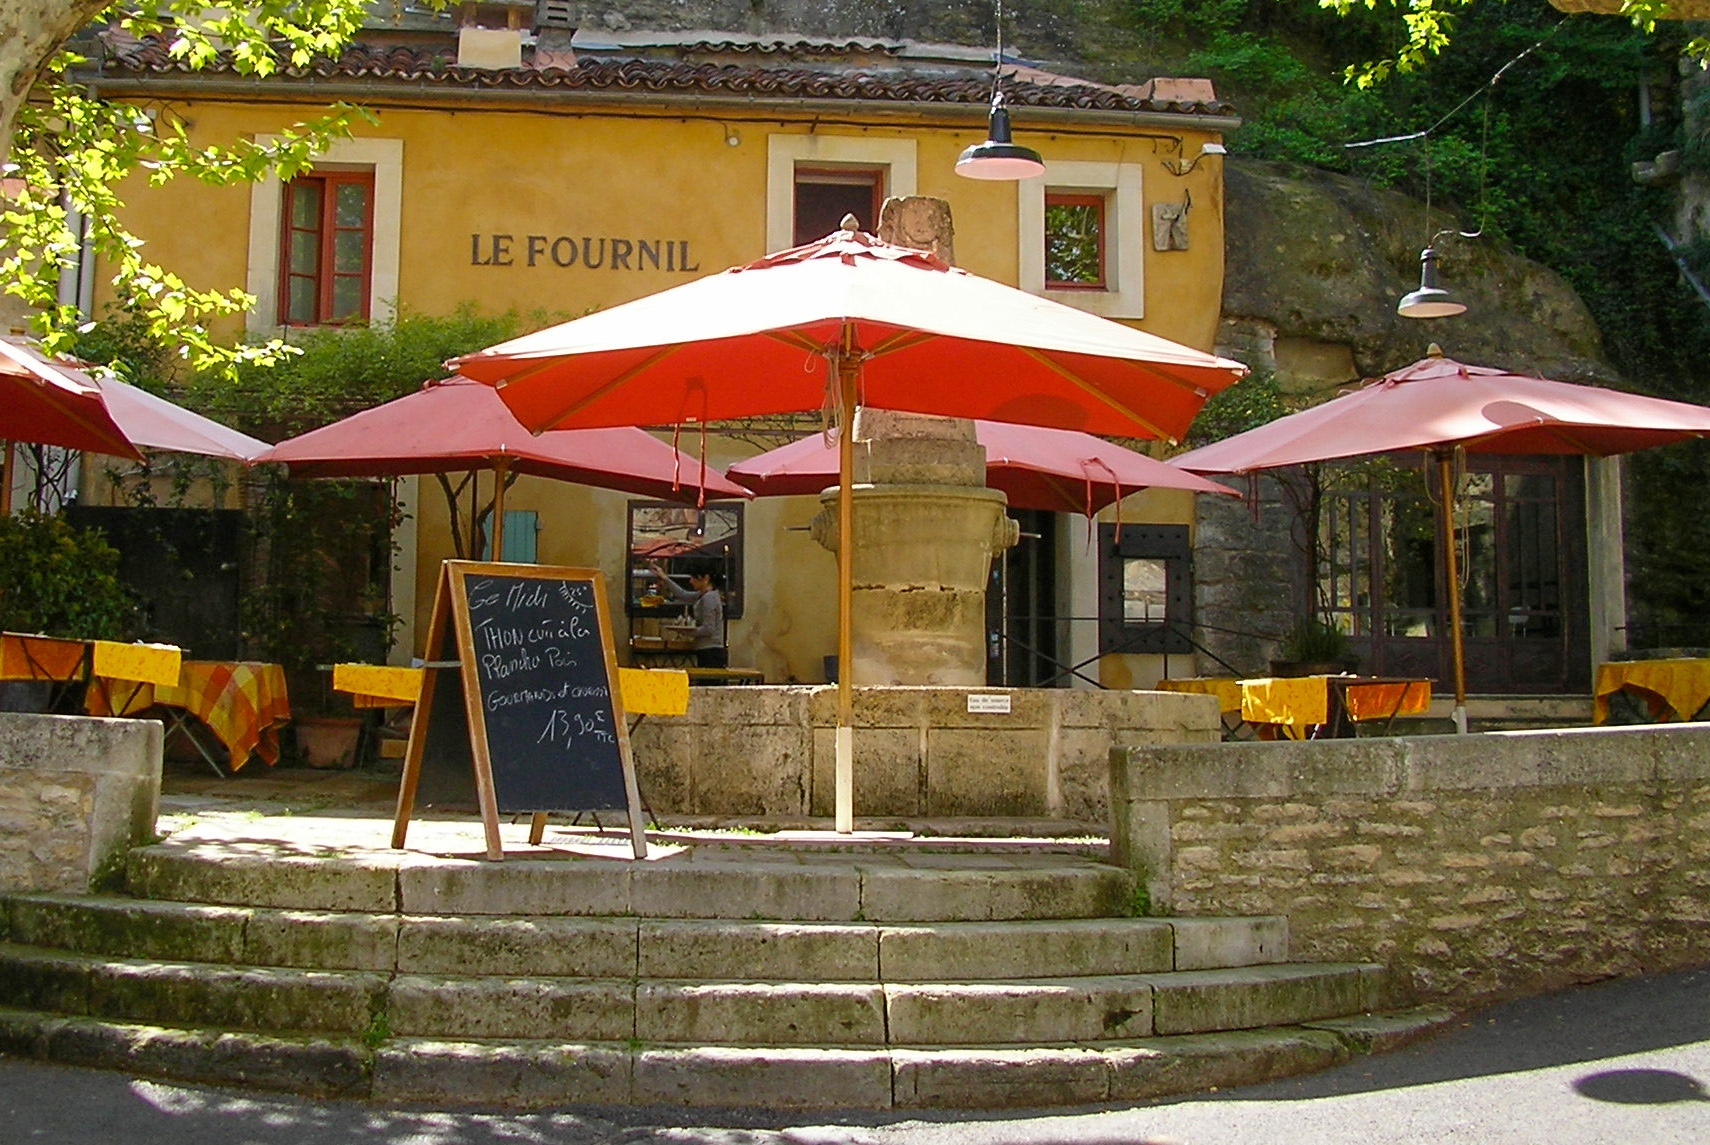 Le Fournil Bonnieux © Pmk58 - licence [CC BY-SA 4.0] from Wikimedia Commons